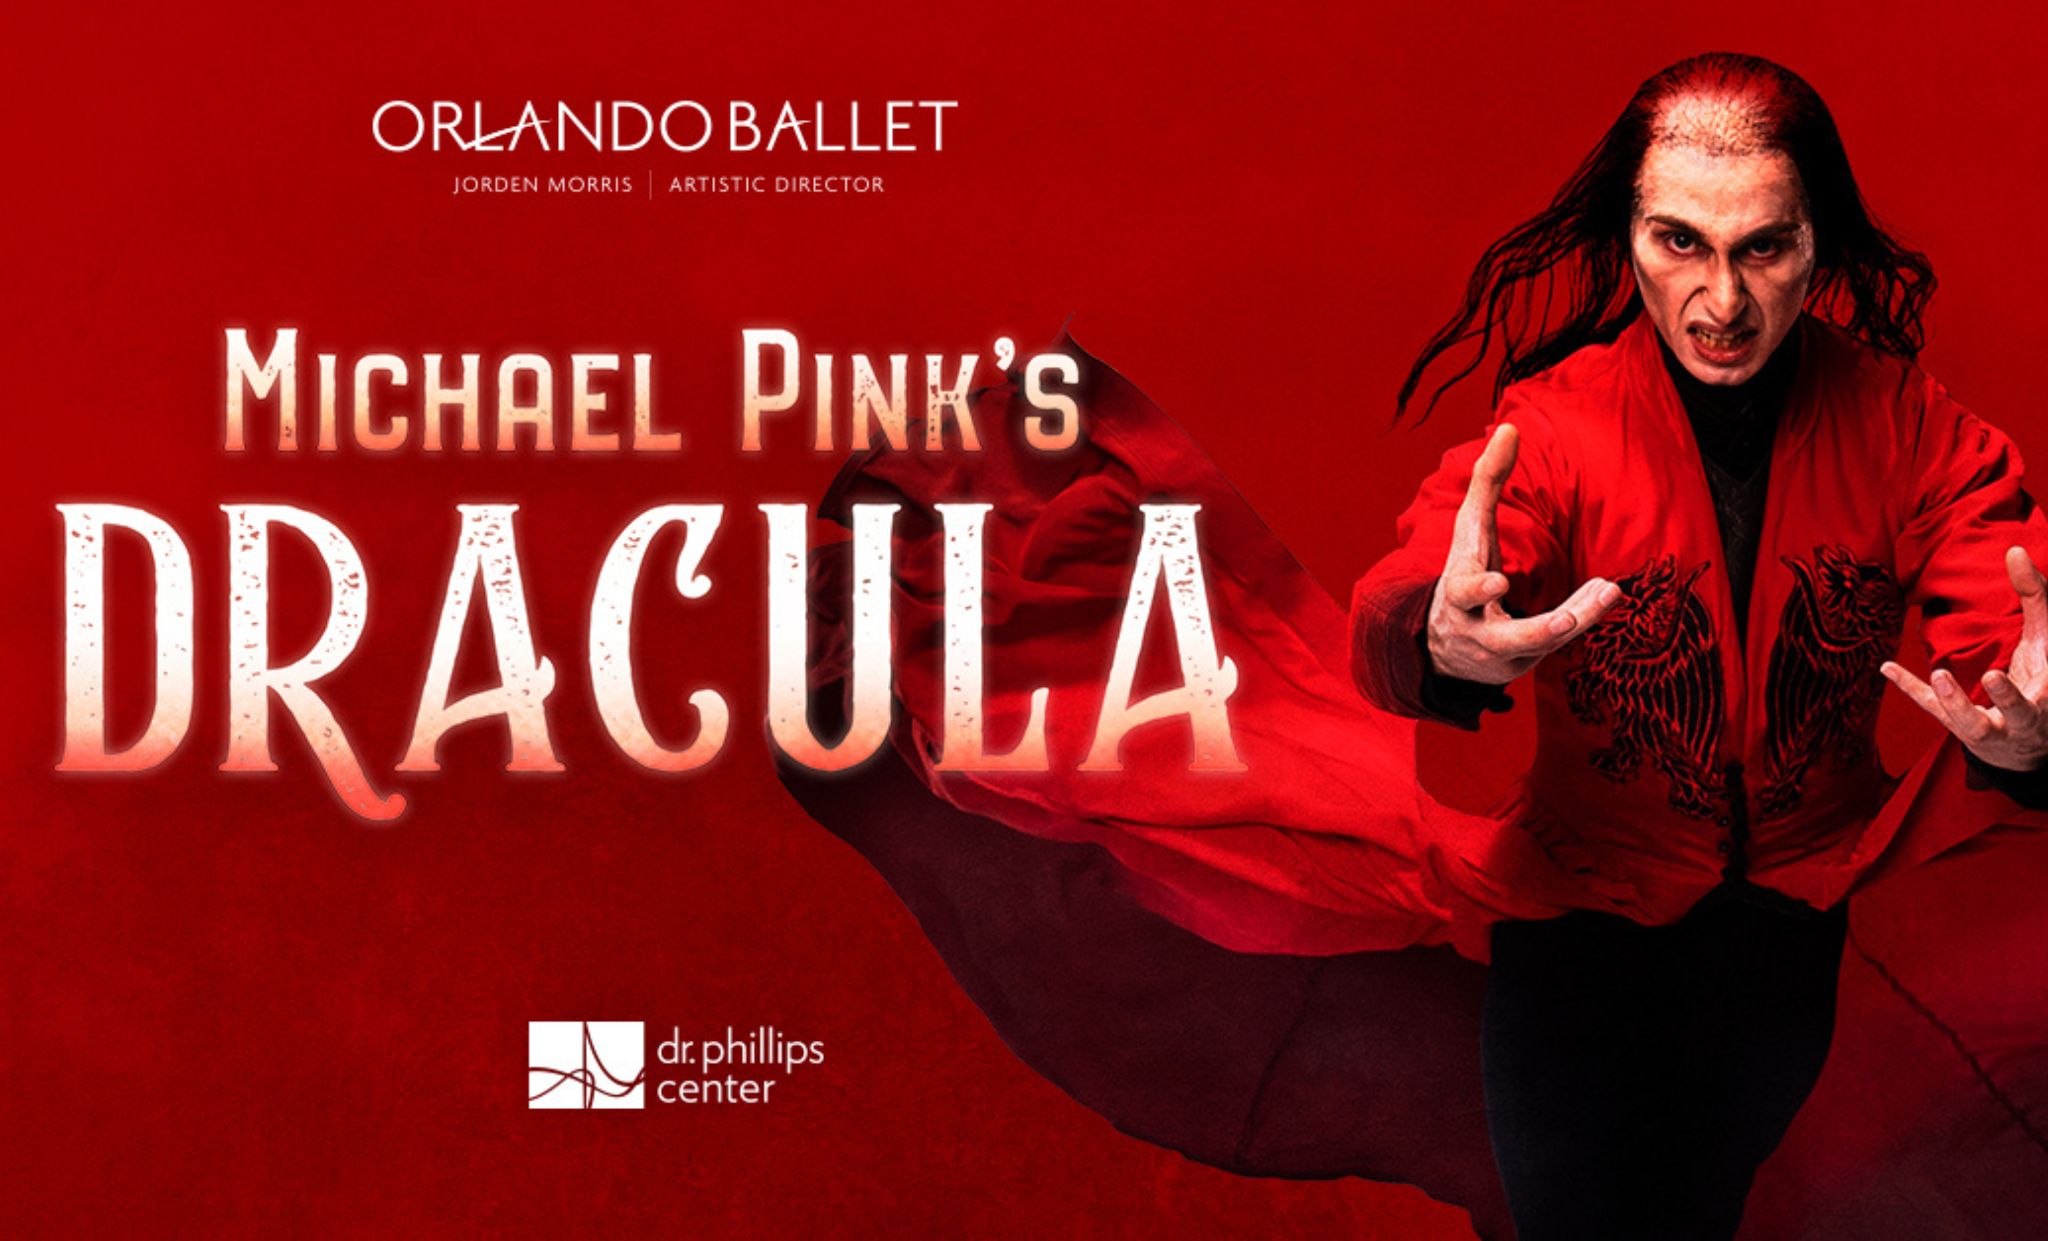 Dracula Performed By Orlando Ballet | Oct 20-23, 2022 | Dr. Phillips Center